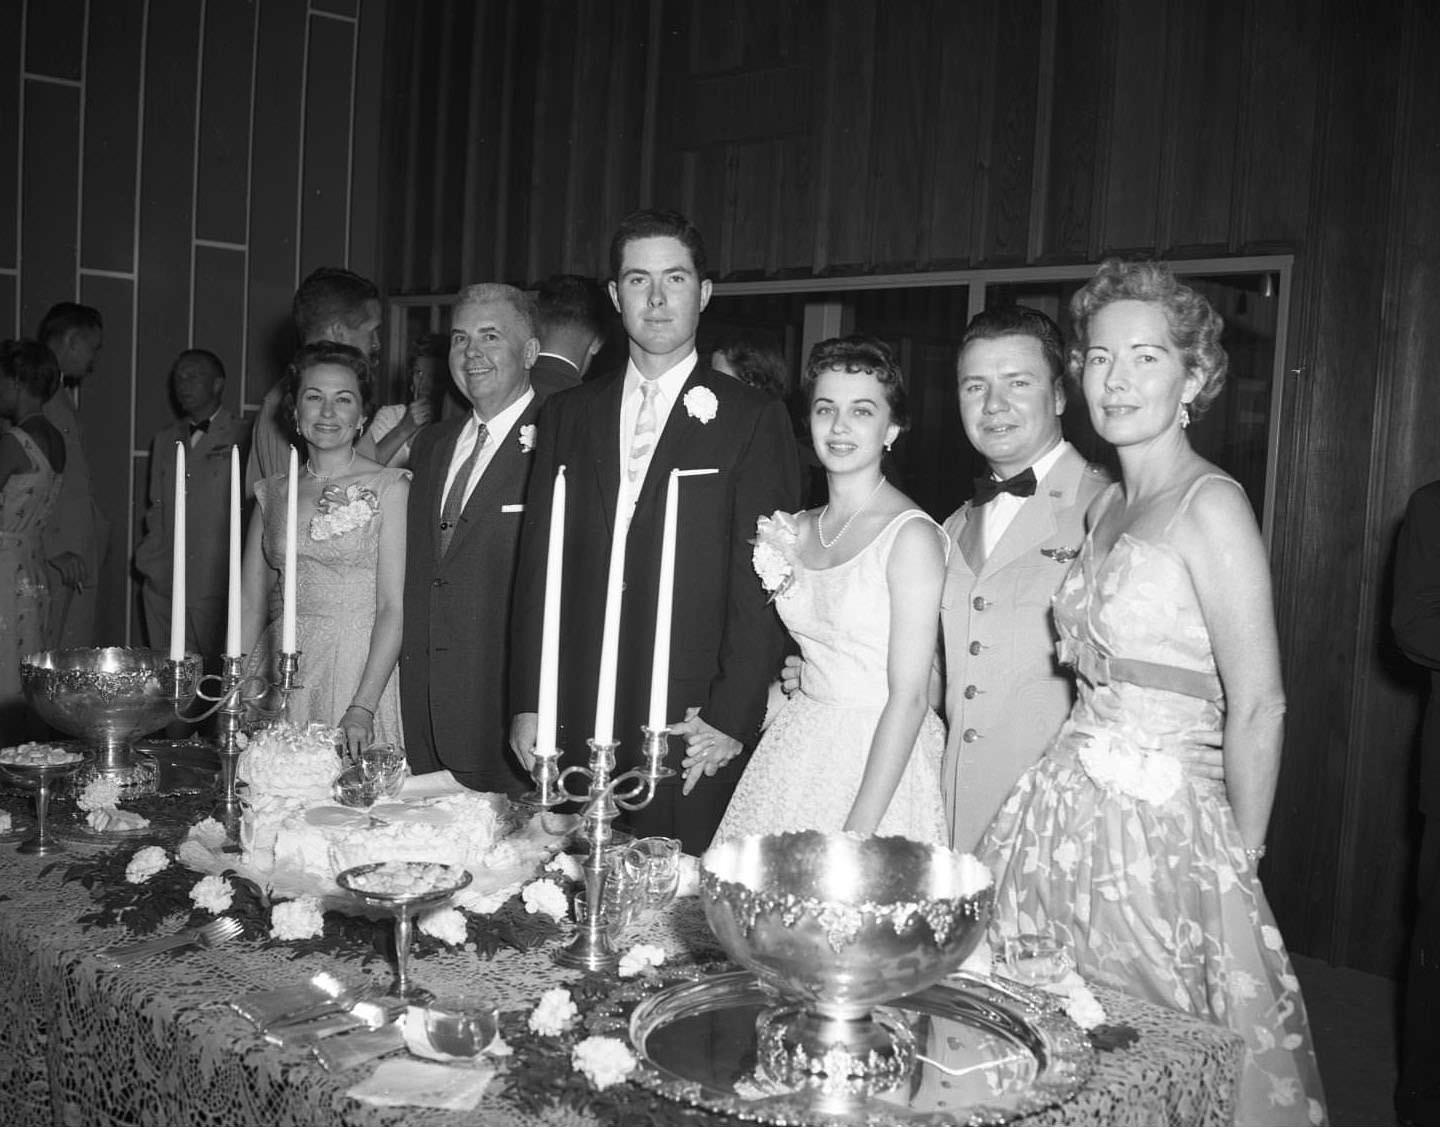 Pete Olds and Louis A. Rochez alongside other people at a banquet at the Dyess Air Force Base, 1954